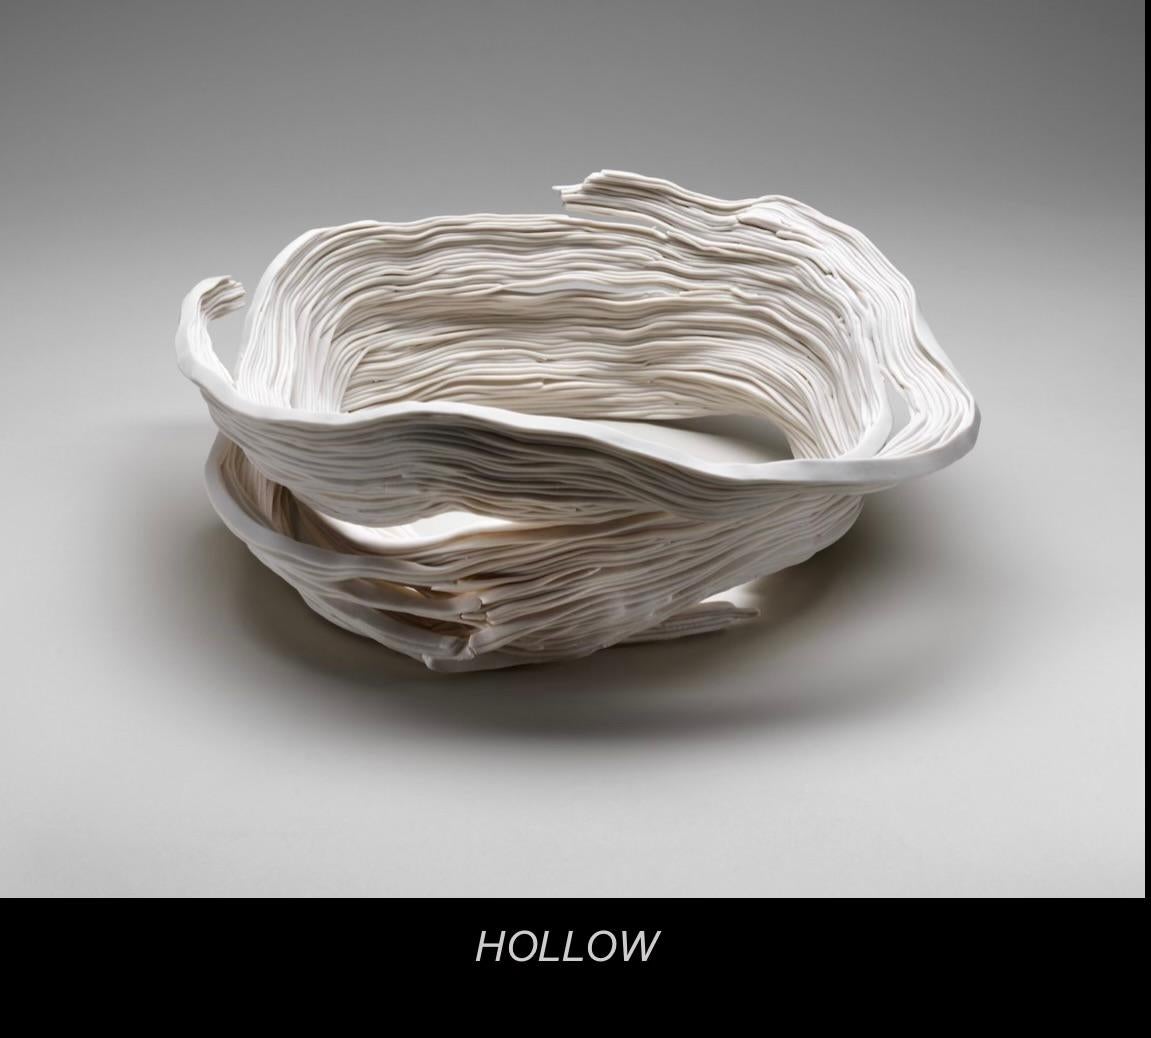 Louise Pappageorge Abstract Sculpture - HOLLOW